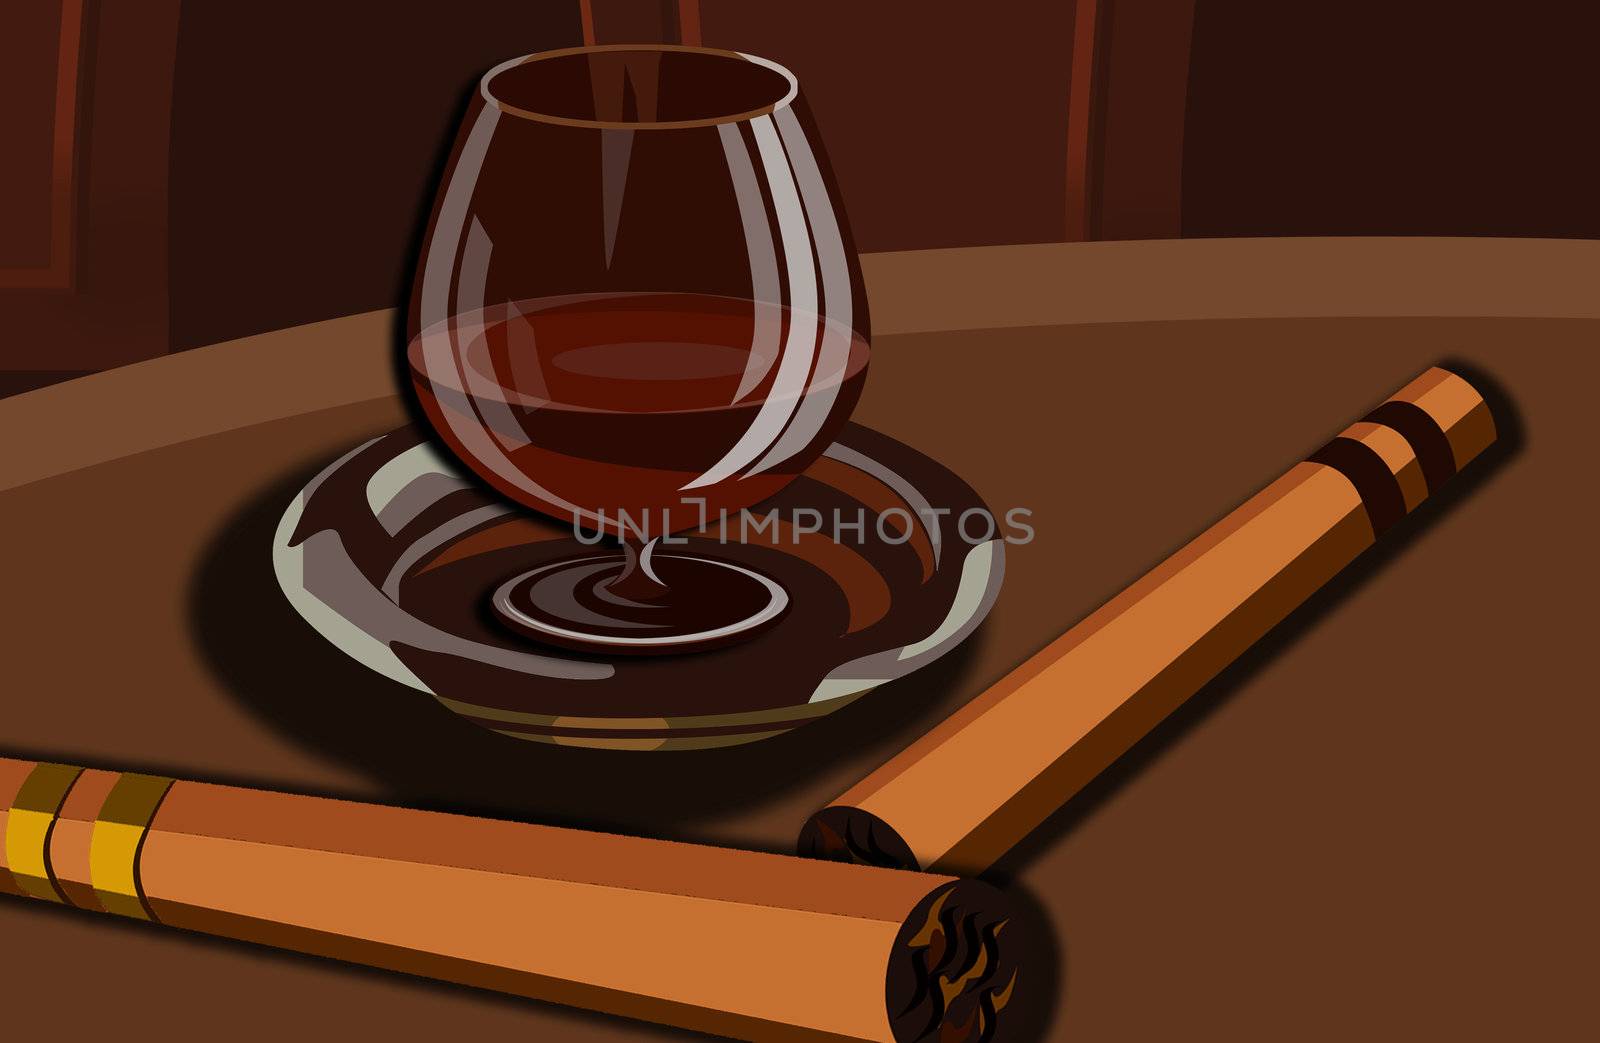 It is a tasty cup of cognac with a cigar